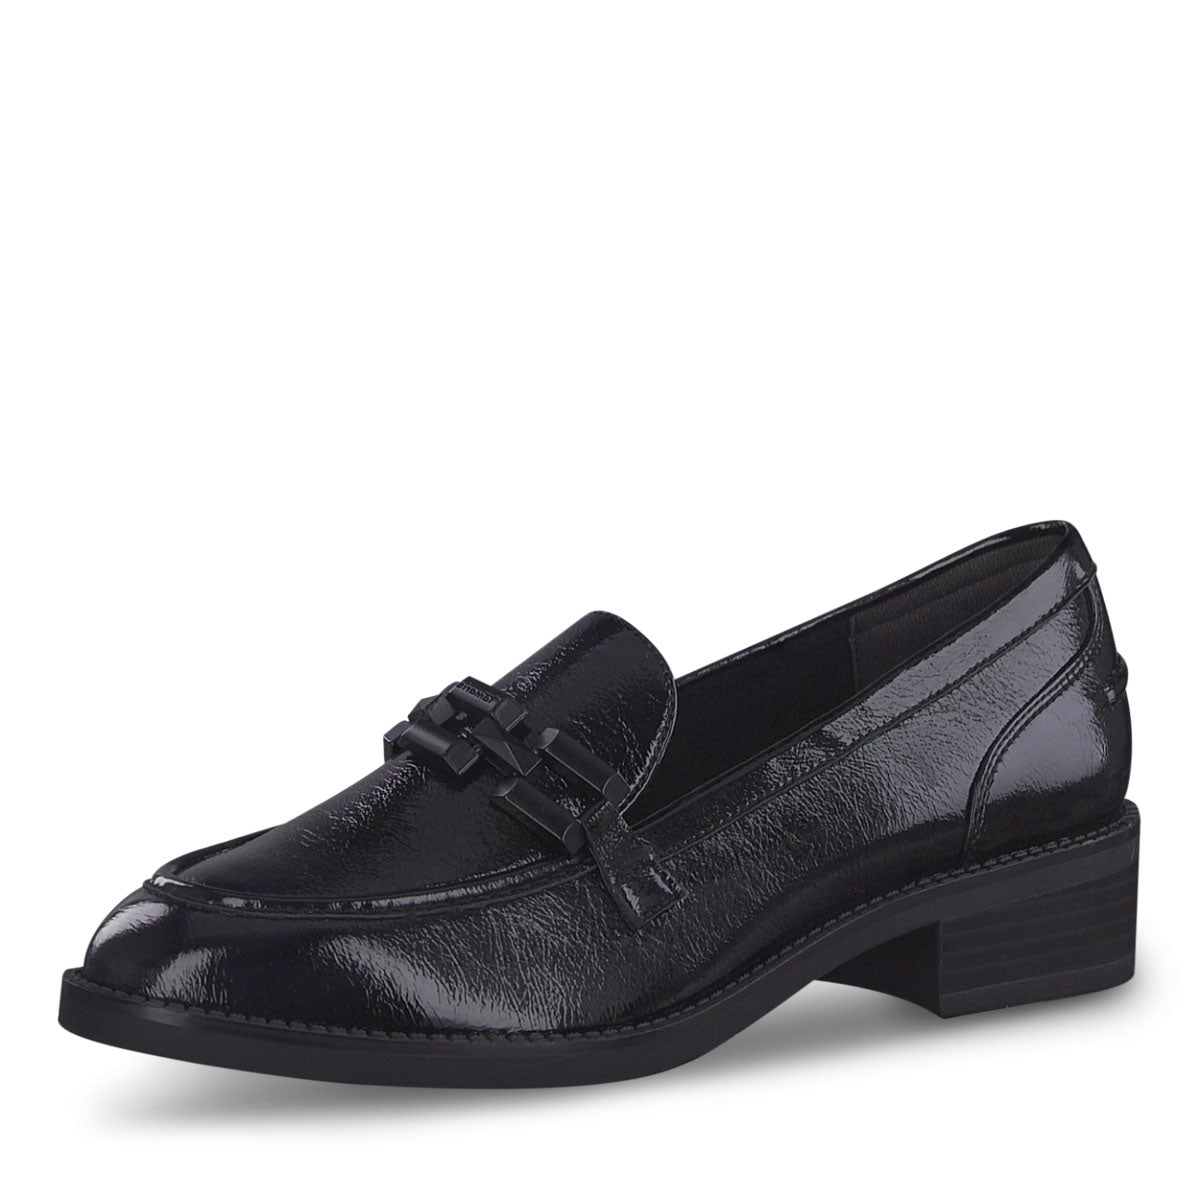 Old Sole Black Patent Loafers